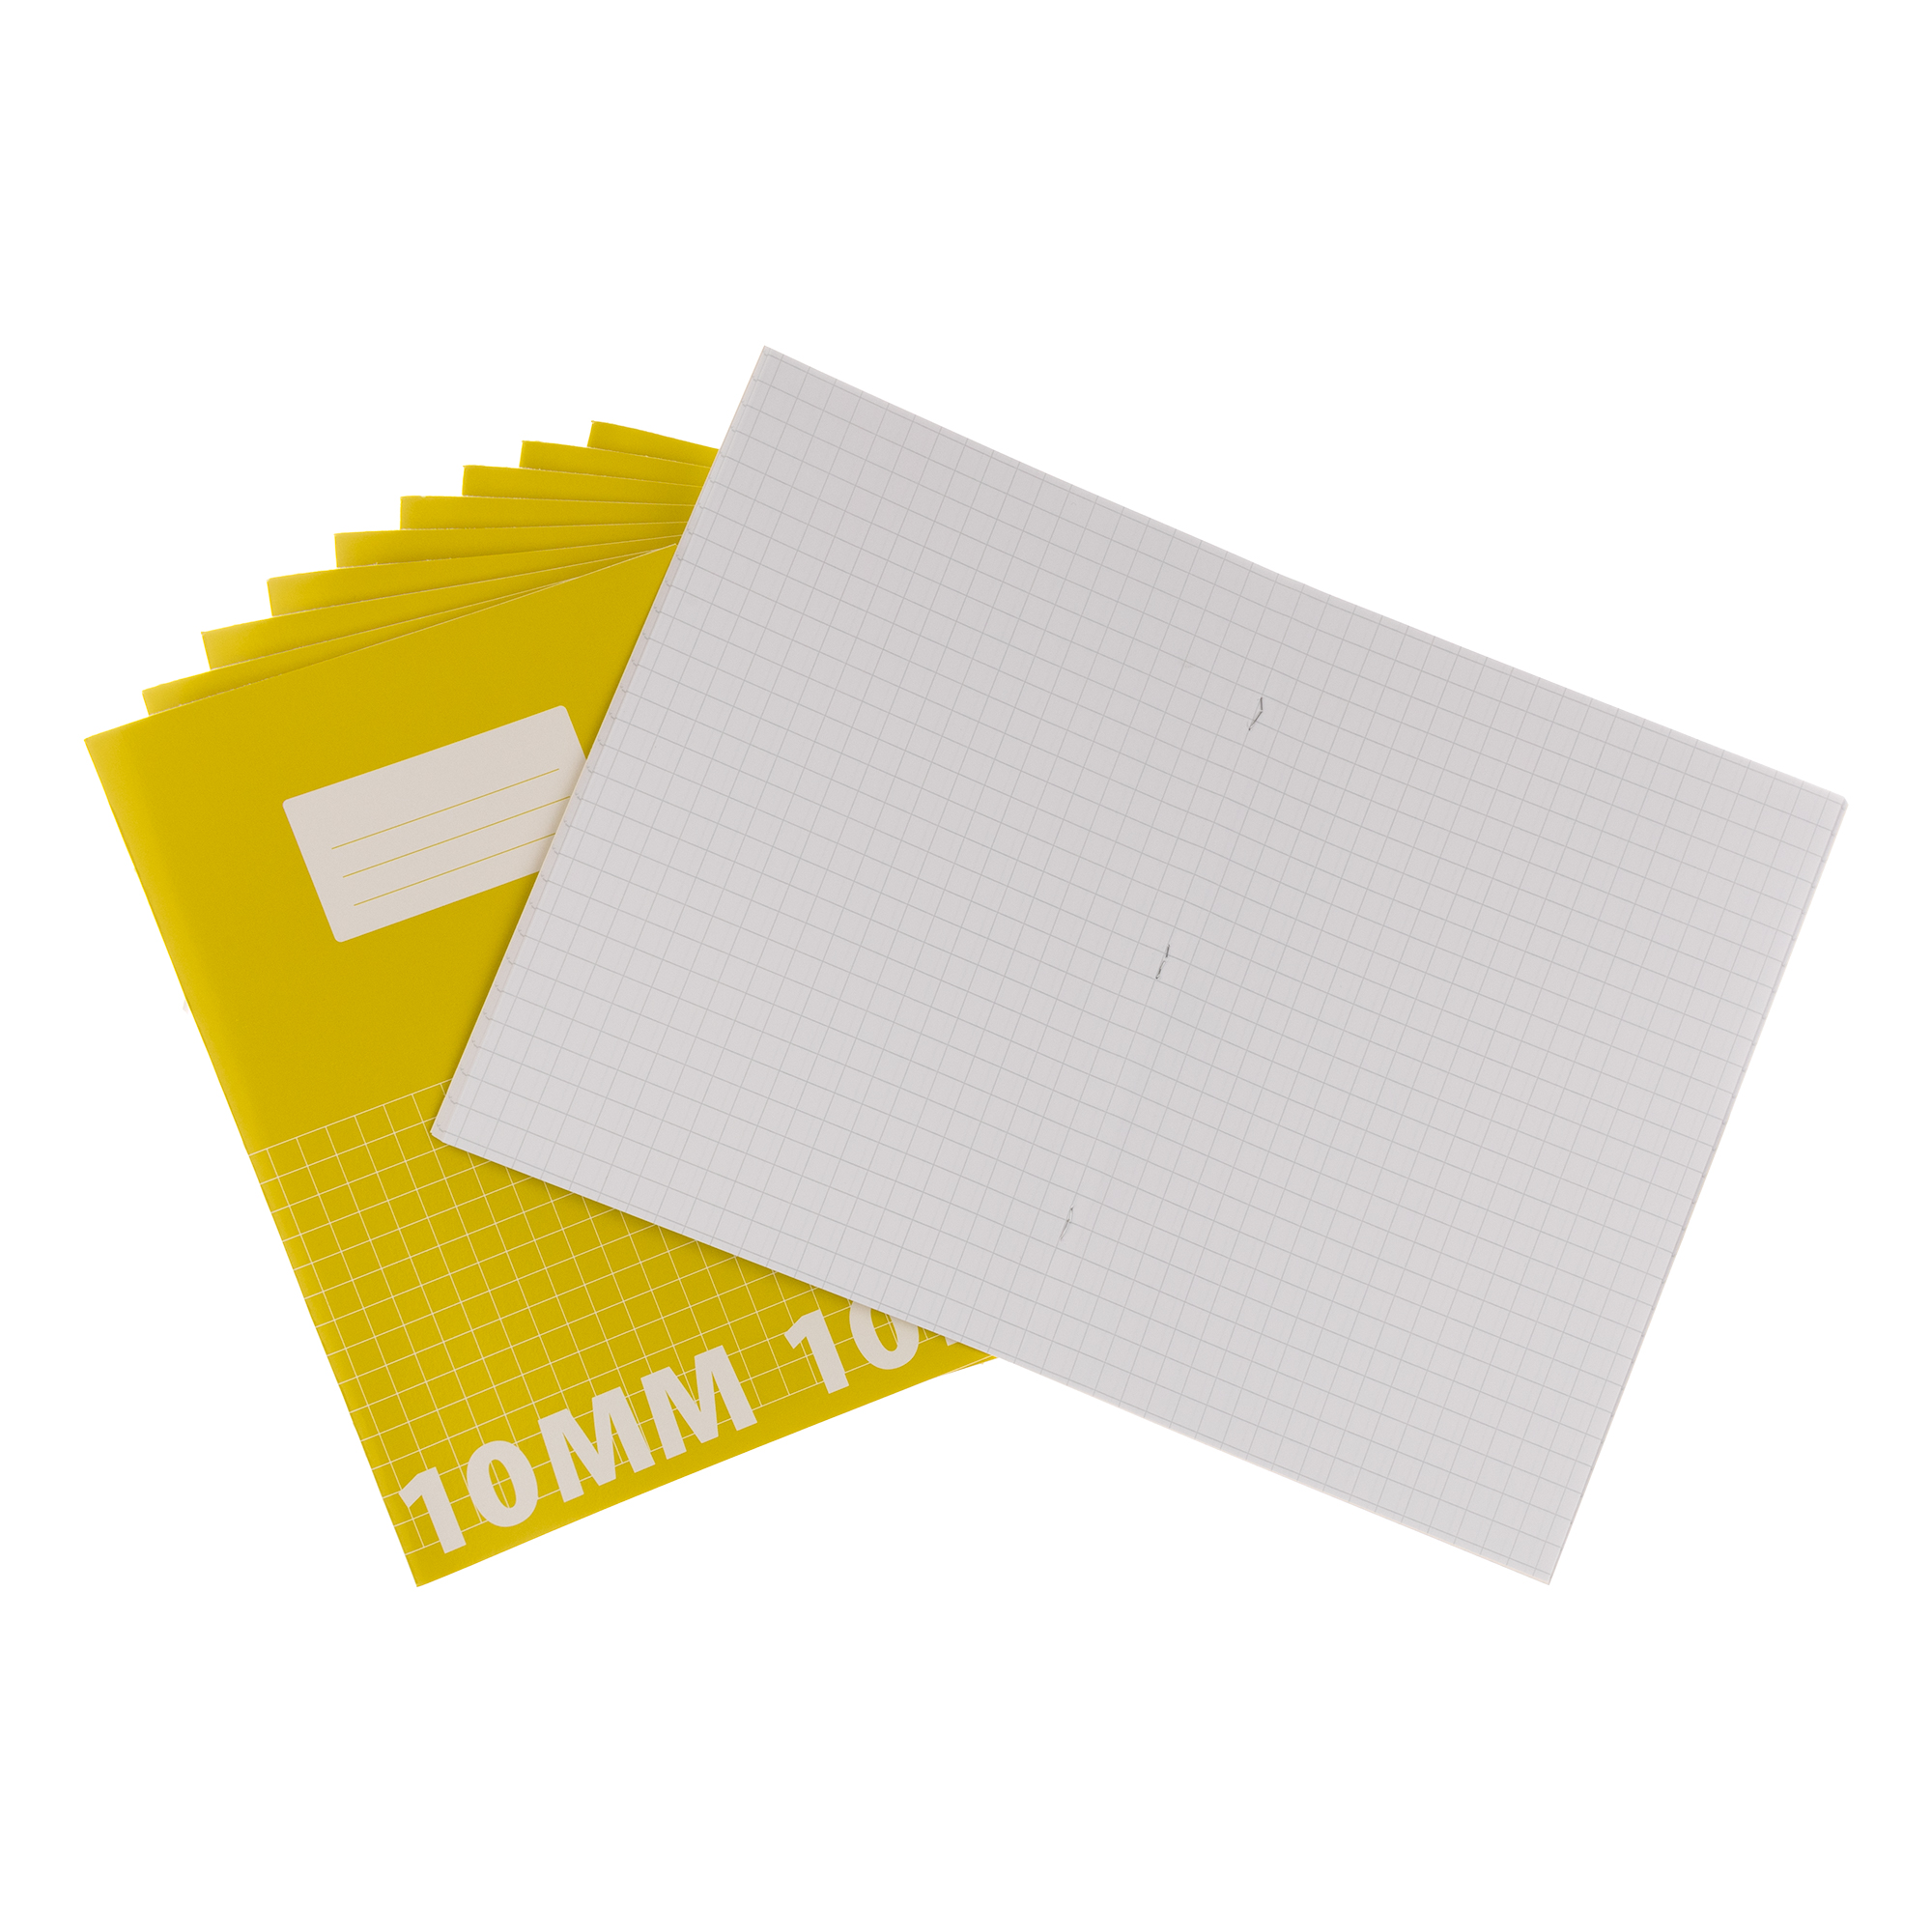 Cmates A4 Glossy Ex Book Yellow 10mm Sq